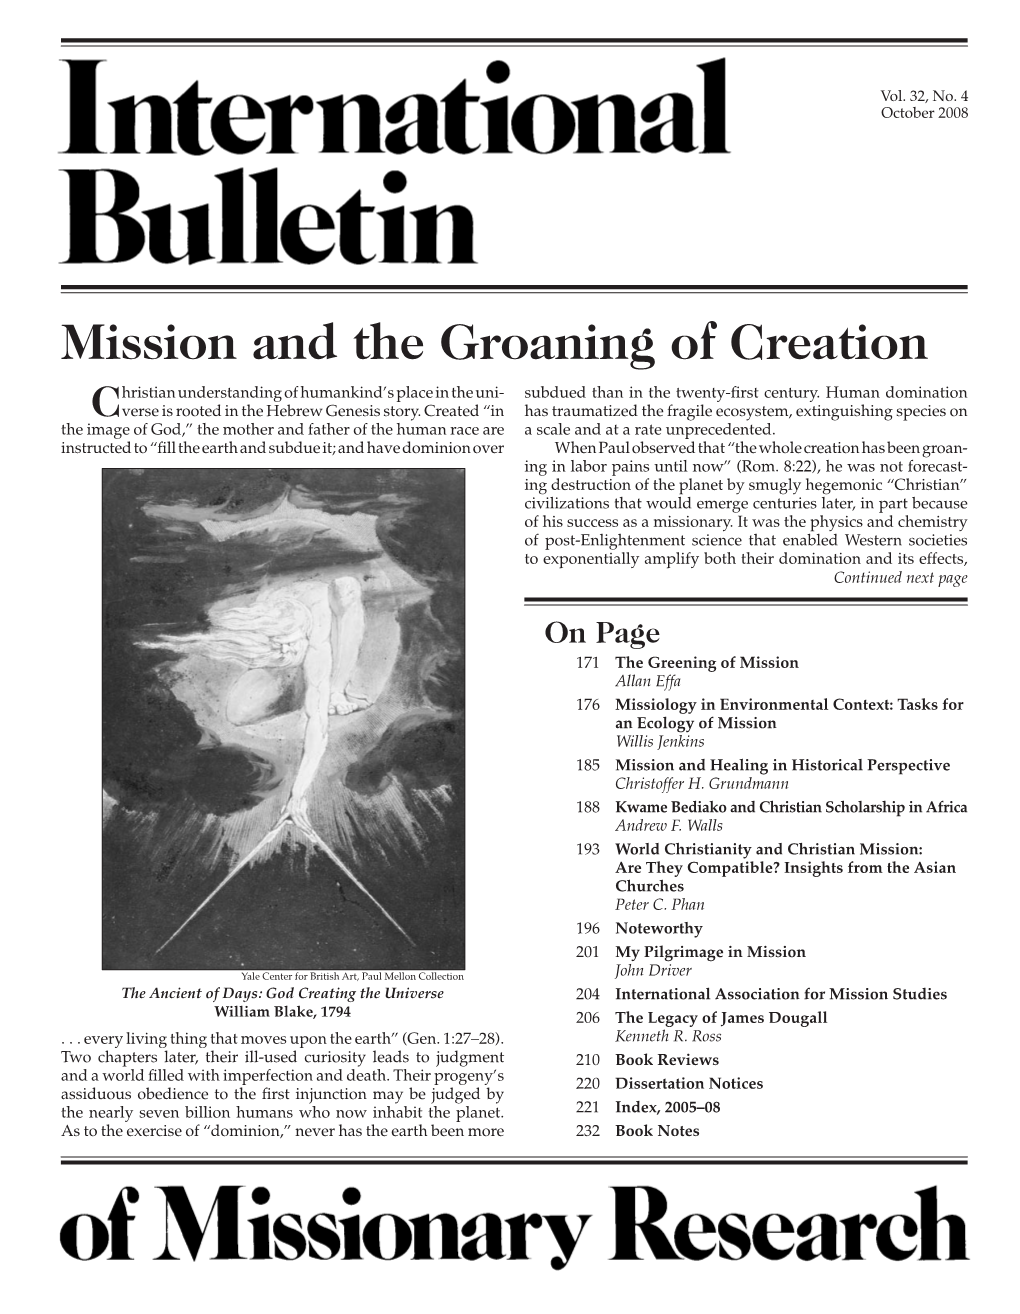 Mission and the Groaning of Creation